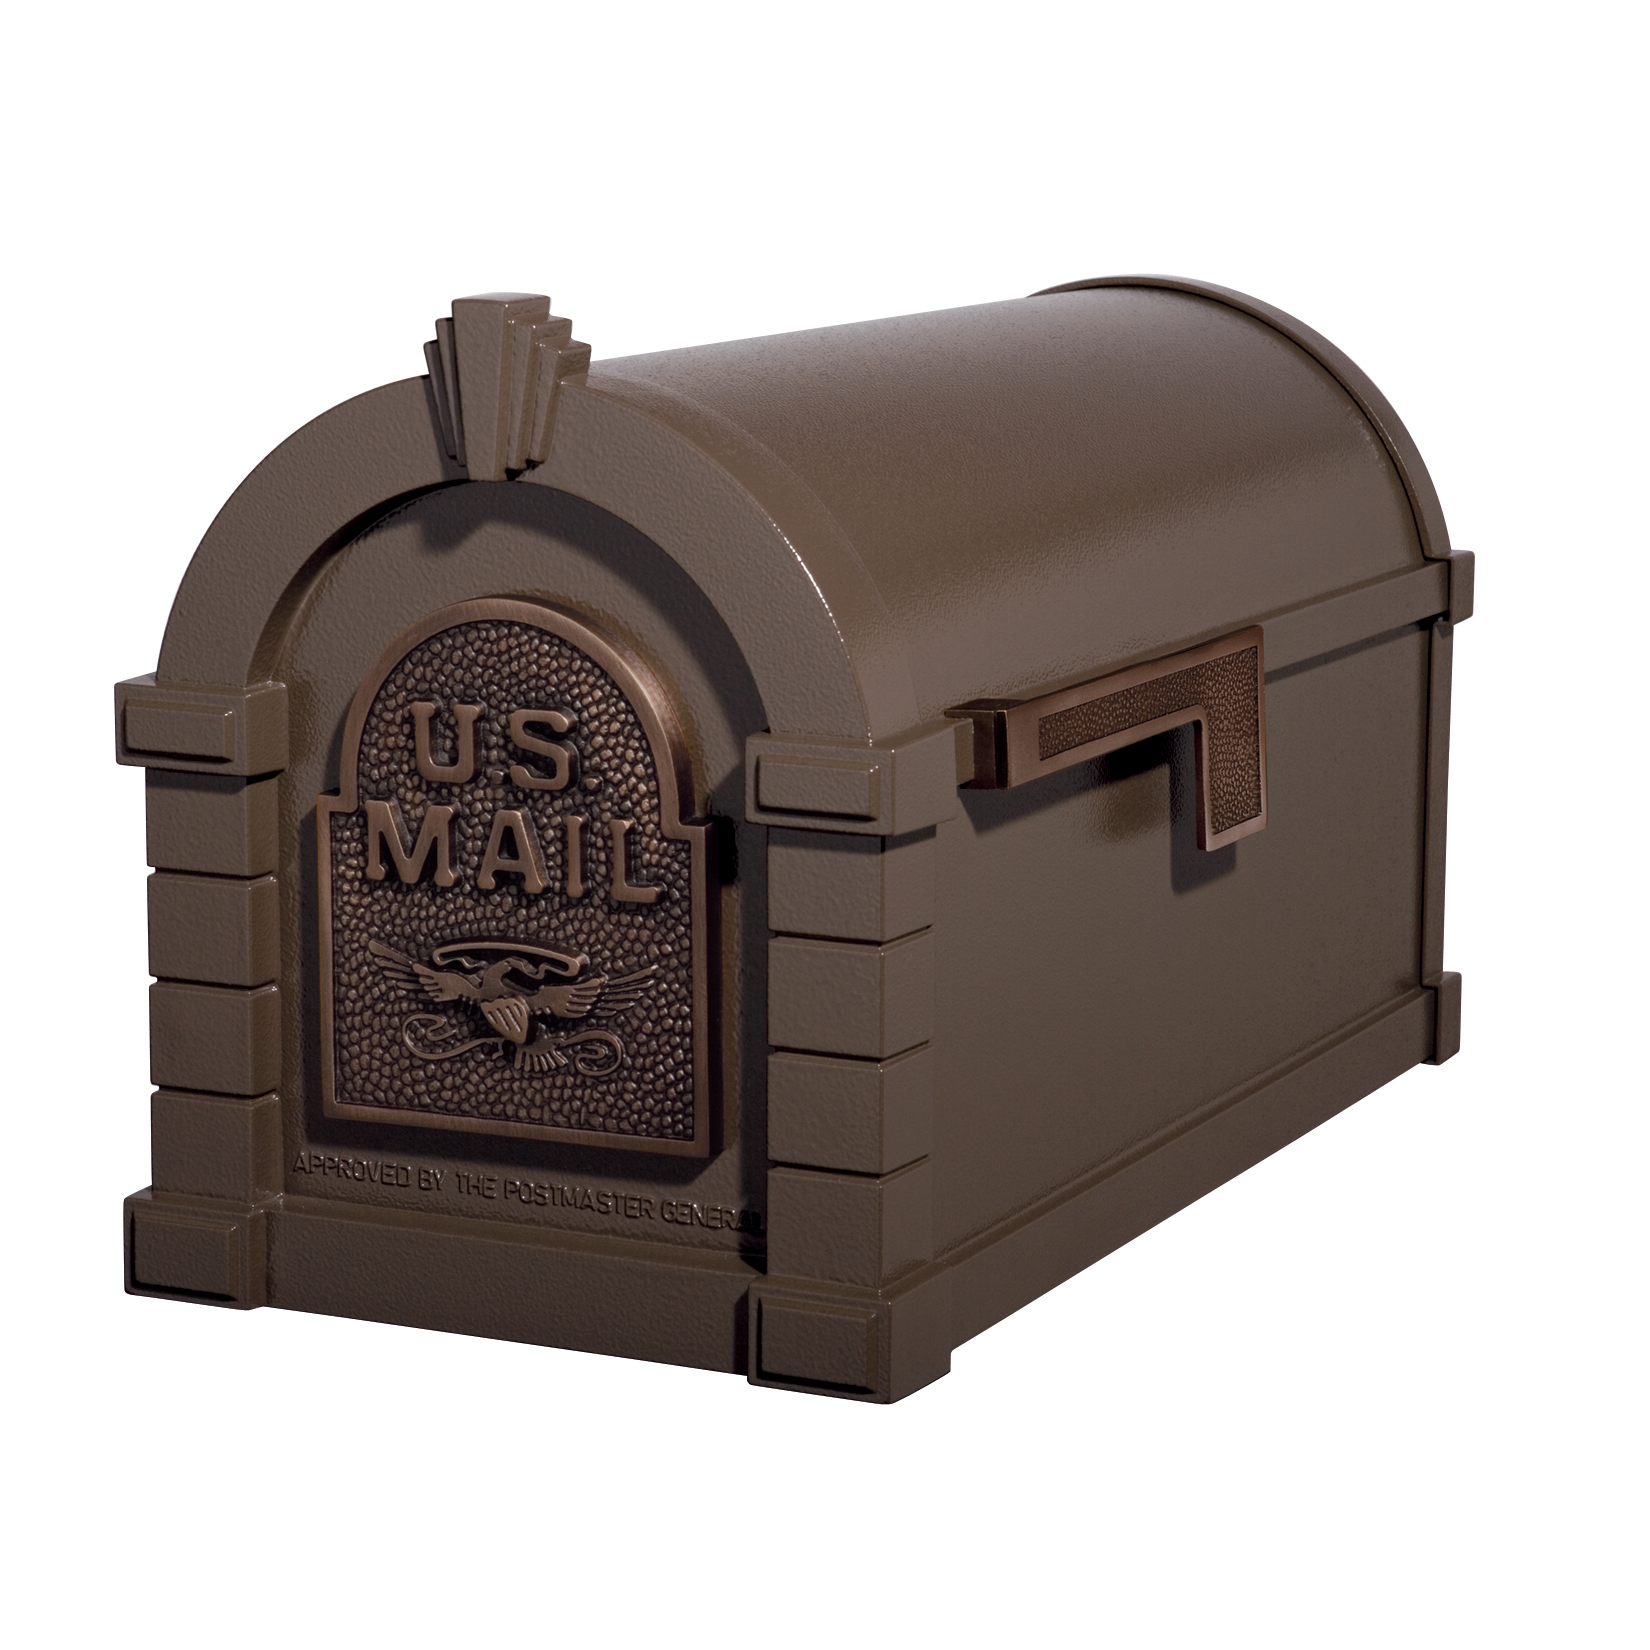 Gaines Eagle Keystone Mailboxes<br />Bronze with Antique Bronze